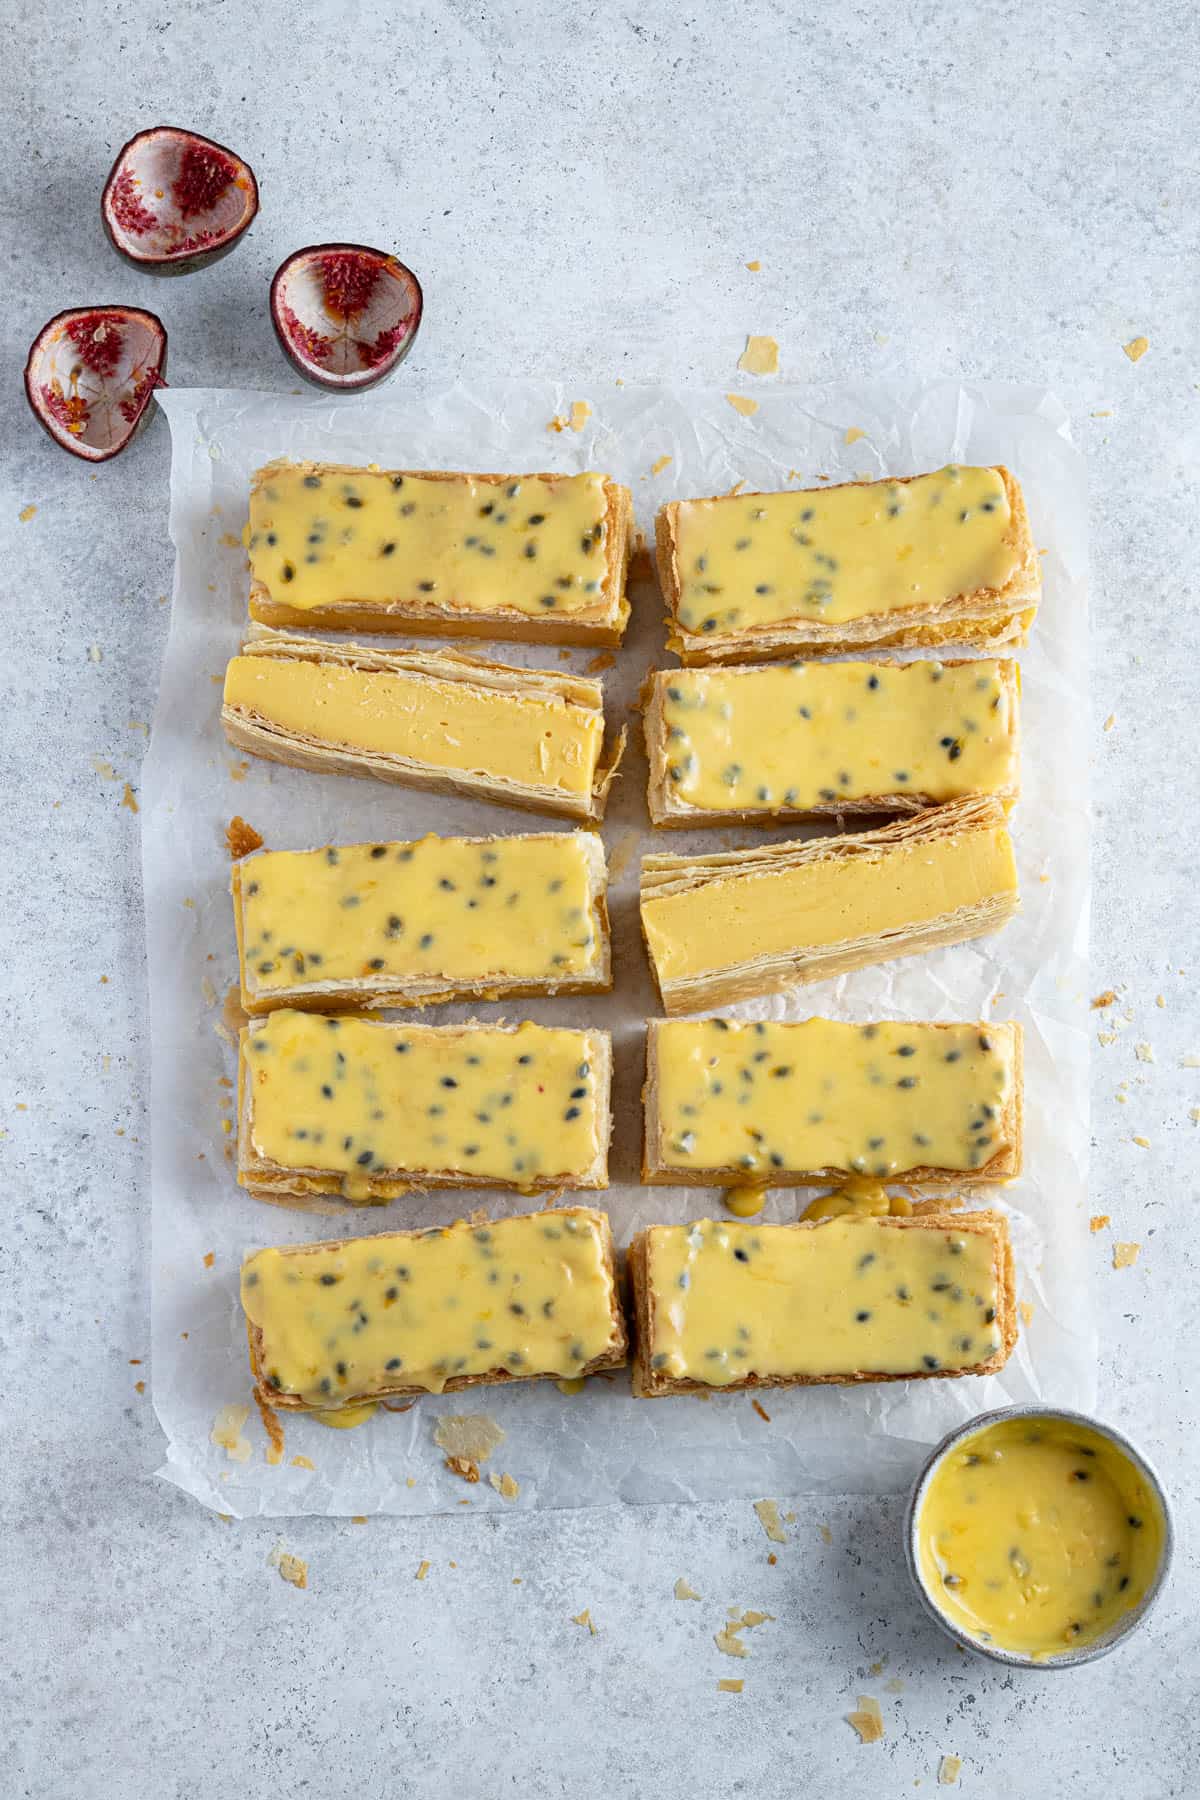 The sliced and glazed custard slices on a sheet of baking paper with passion fruit shells and a bowl of passion fruit glaze.